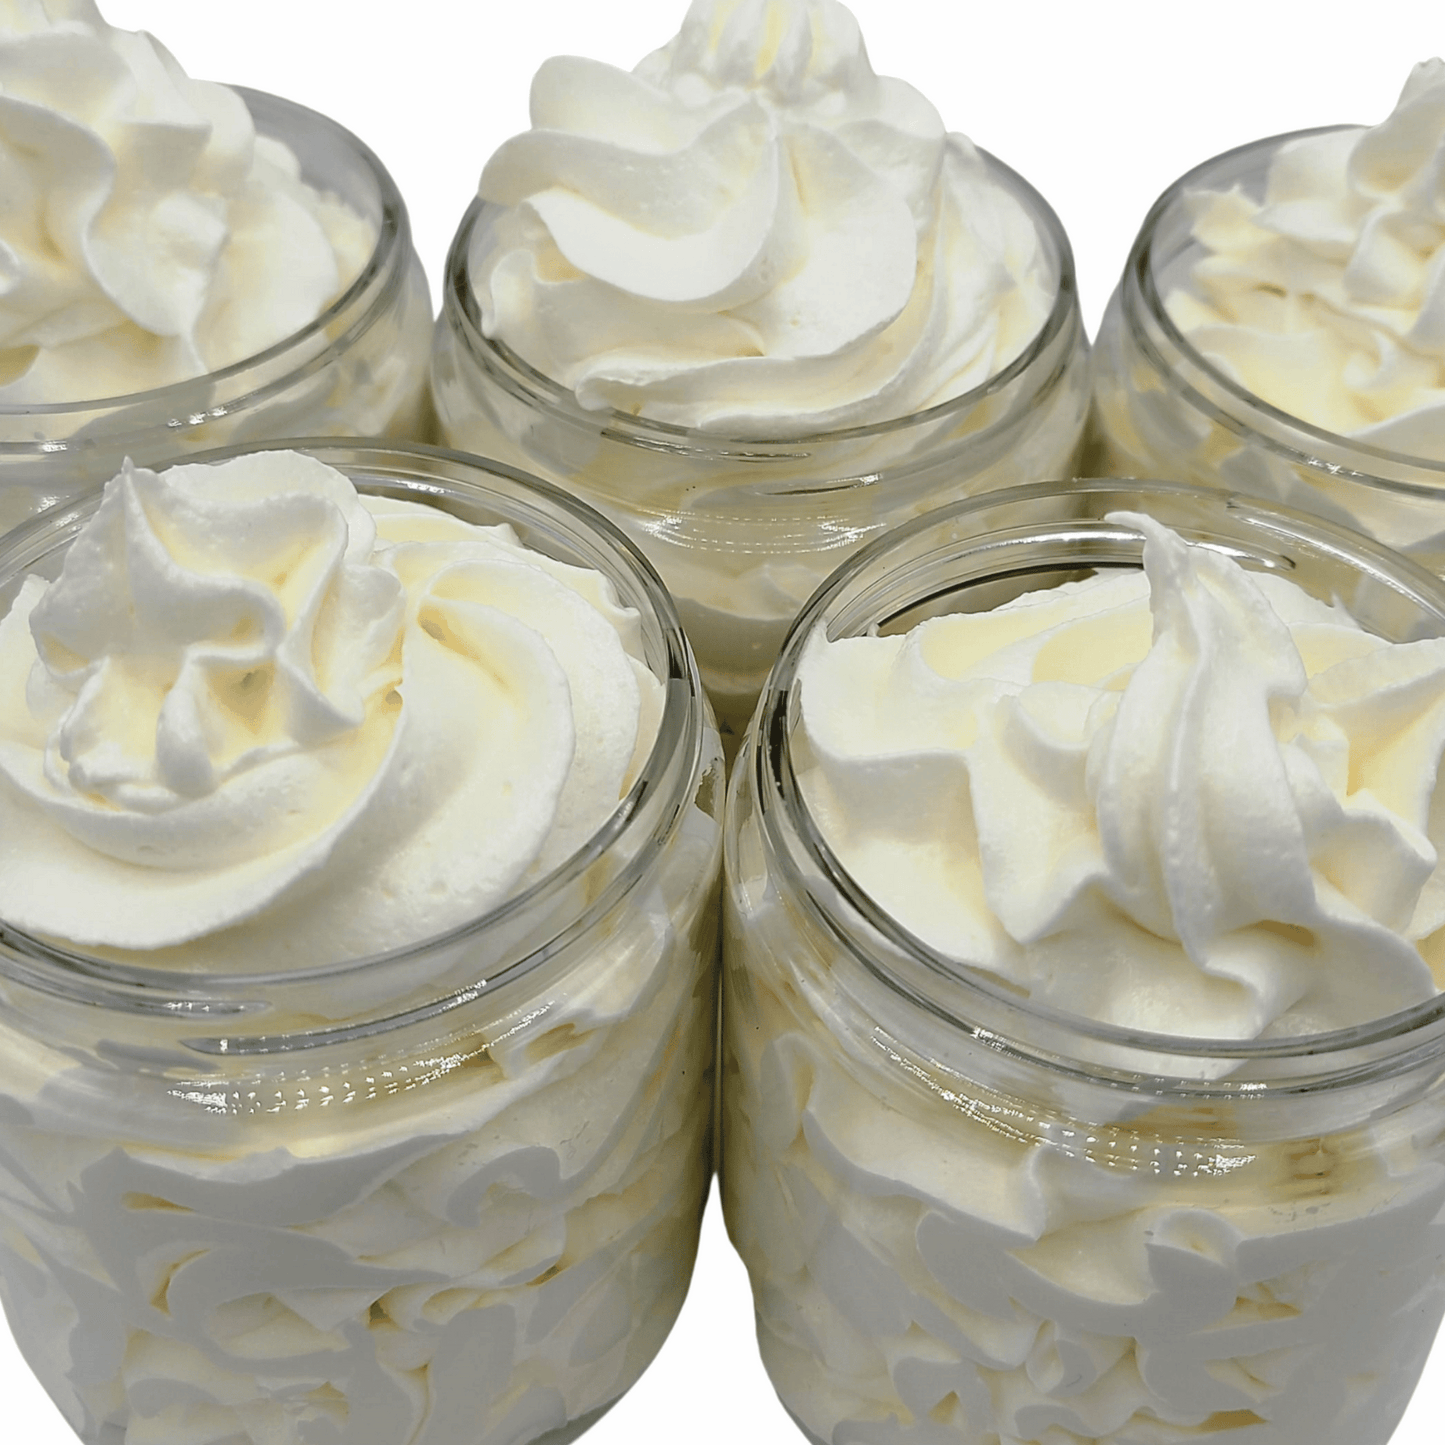 Whipped Body Butter | Cashmere + Cocoa Butter | Vegan